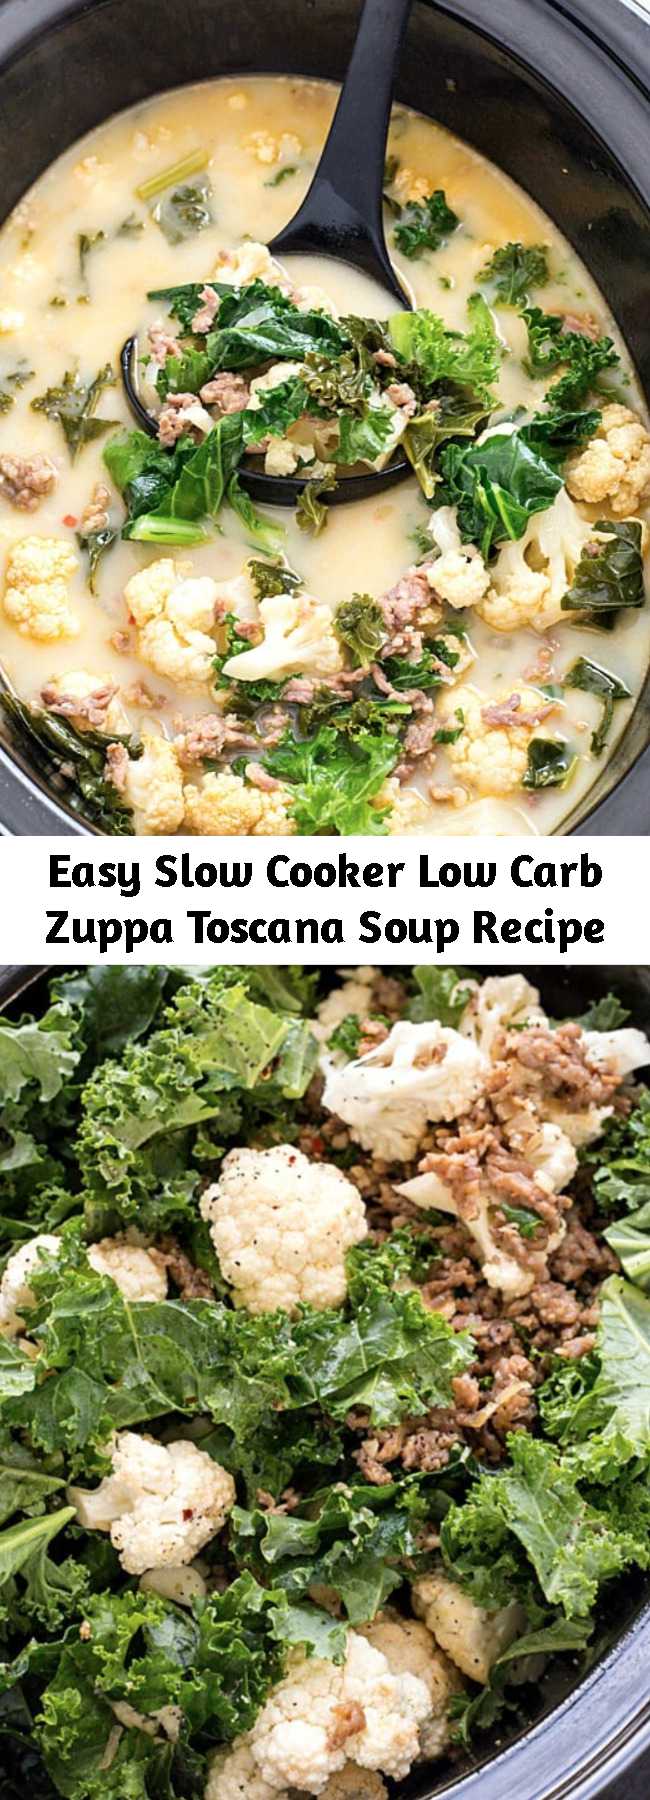 Easy Slow Cooker Low Carb Zuppa Toscana Soup Recipe - Slow Cooker Low Carb Zuppa Toscana Soup - Skip the trip to your local restaurant and make a batch of this insanely delicious copycat soup! It's healthy, it's delicious, and it's made low carb! Perfect for a low carb and keto-friendly lifestyle!